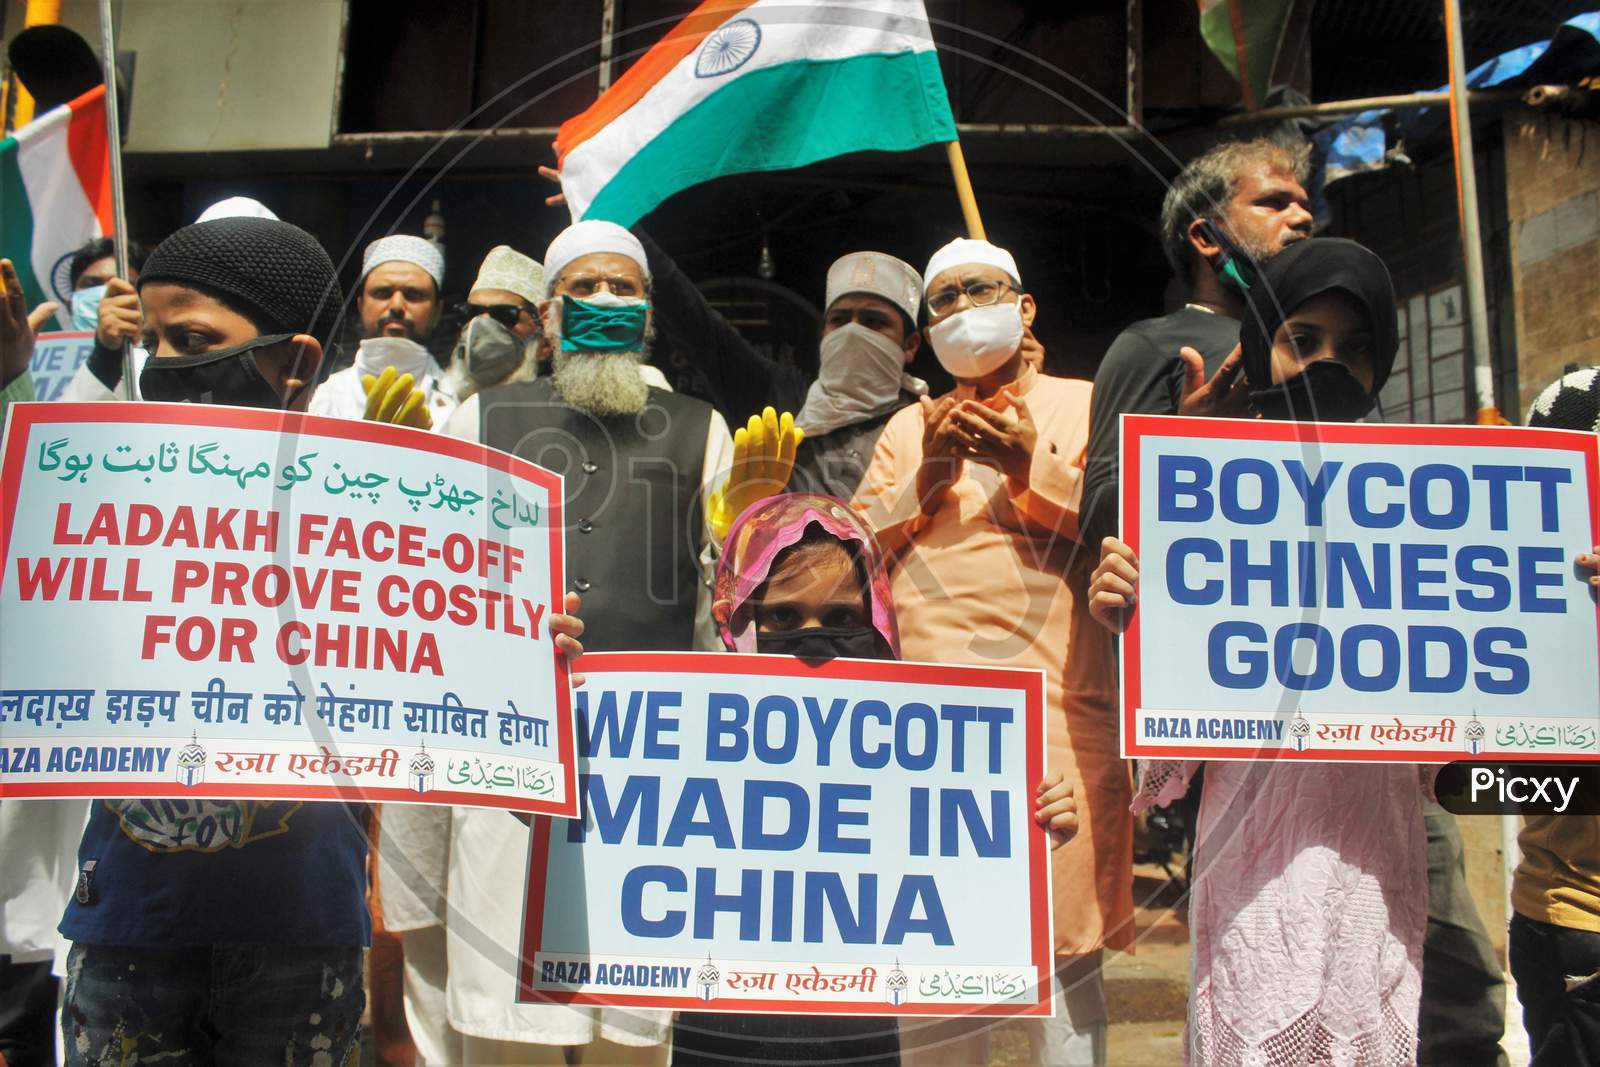 Demonstrators wearing protective masks take part in a protest to condemn the killing of 20 Indian Soldiers over the Ladakh clash with China, in Mumbai, India on June 20, 2020.